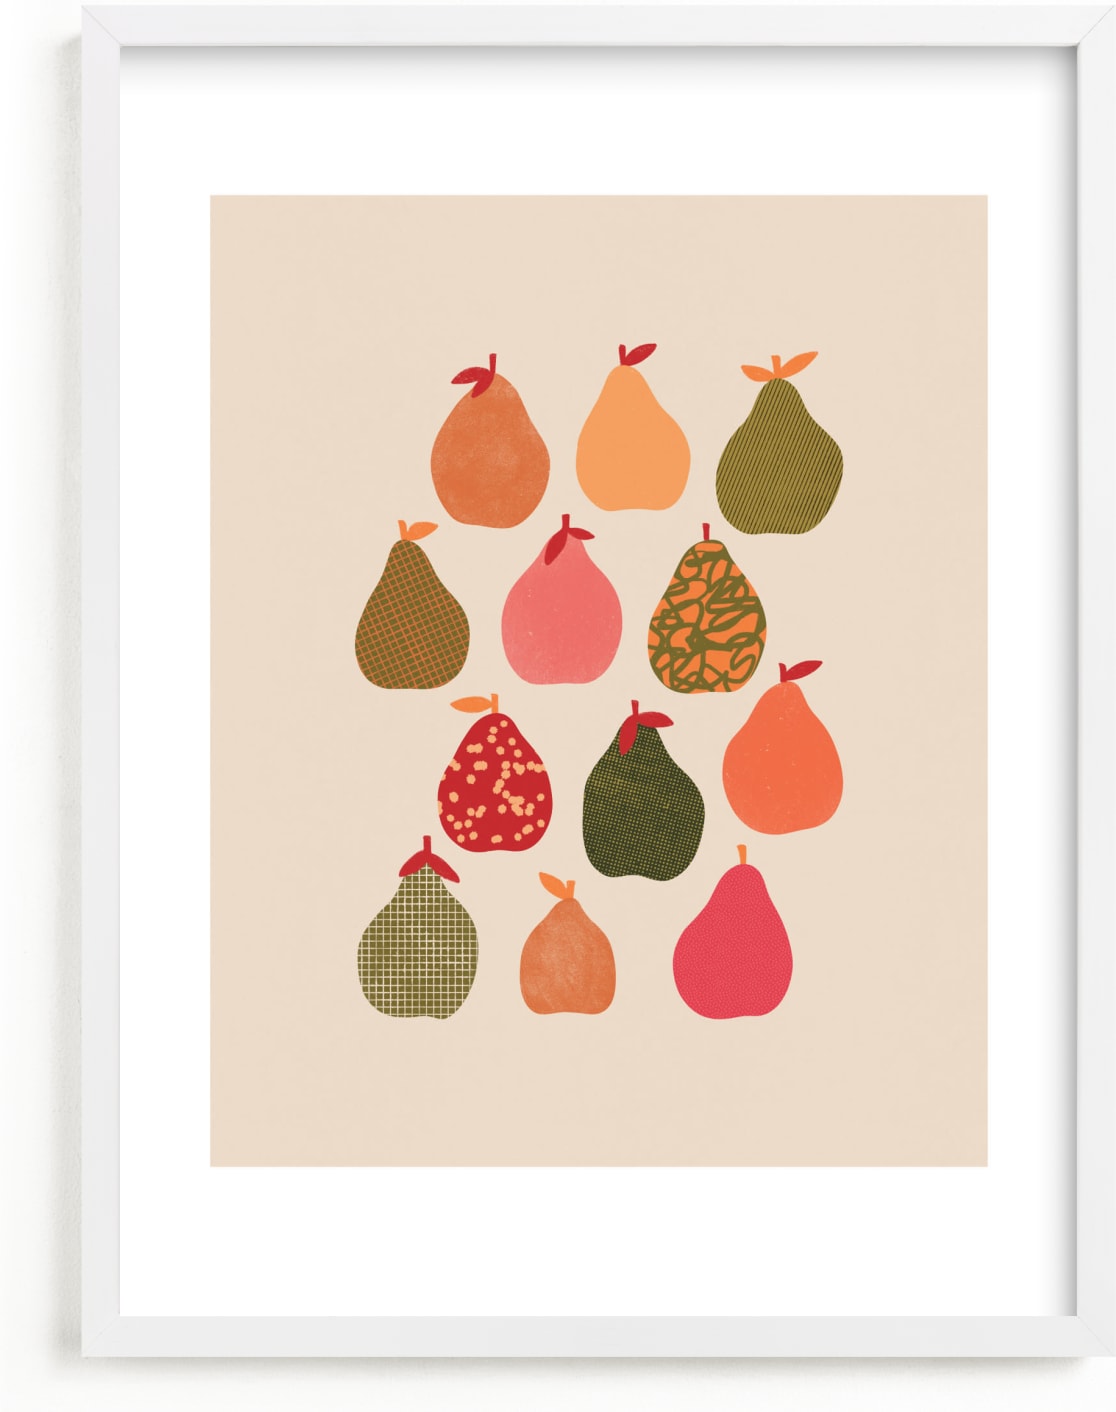 This is a colorful kids wall art by Alisa Galitsyna called Pears.